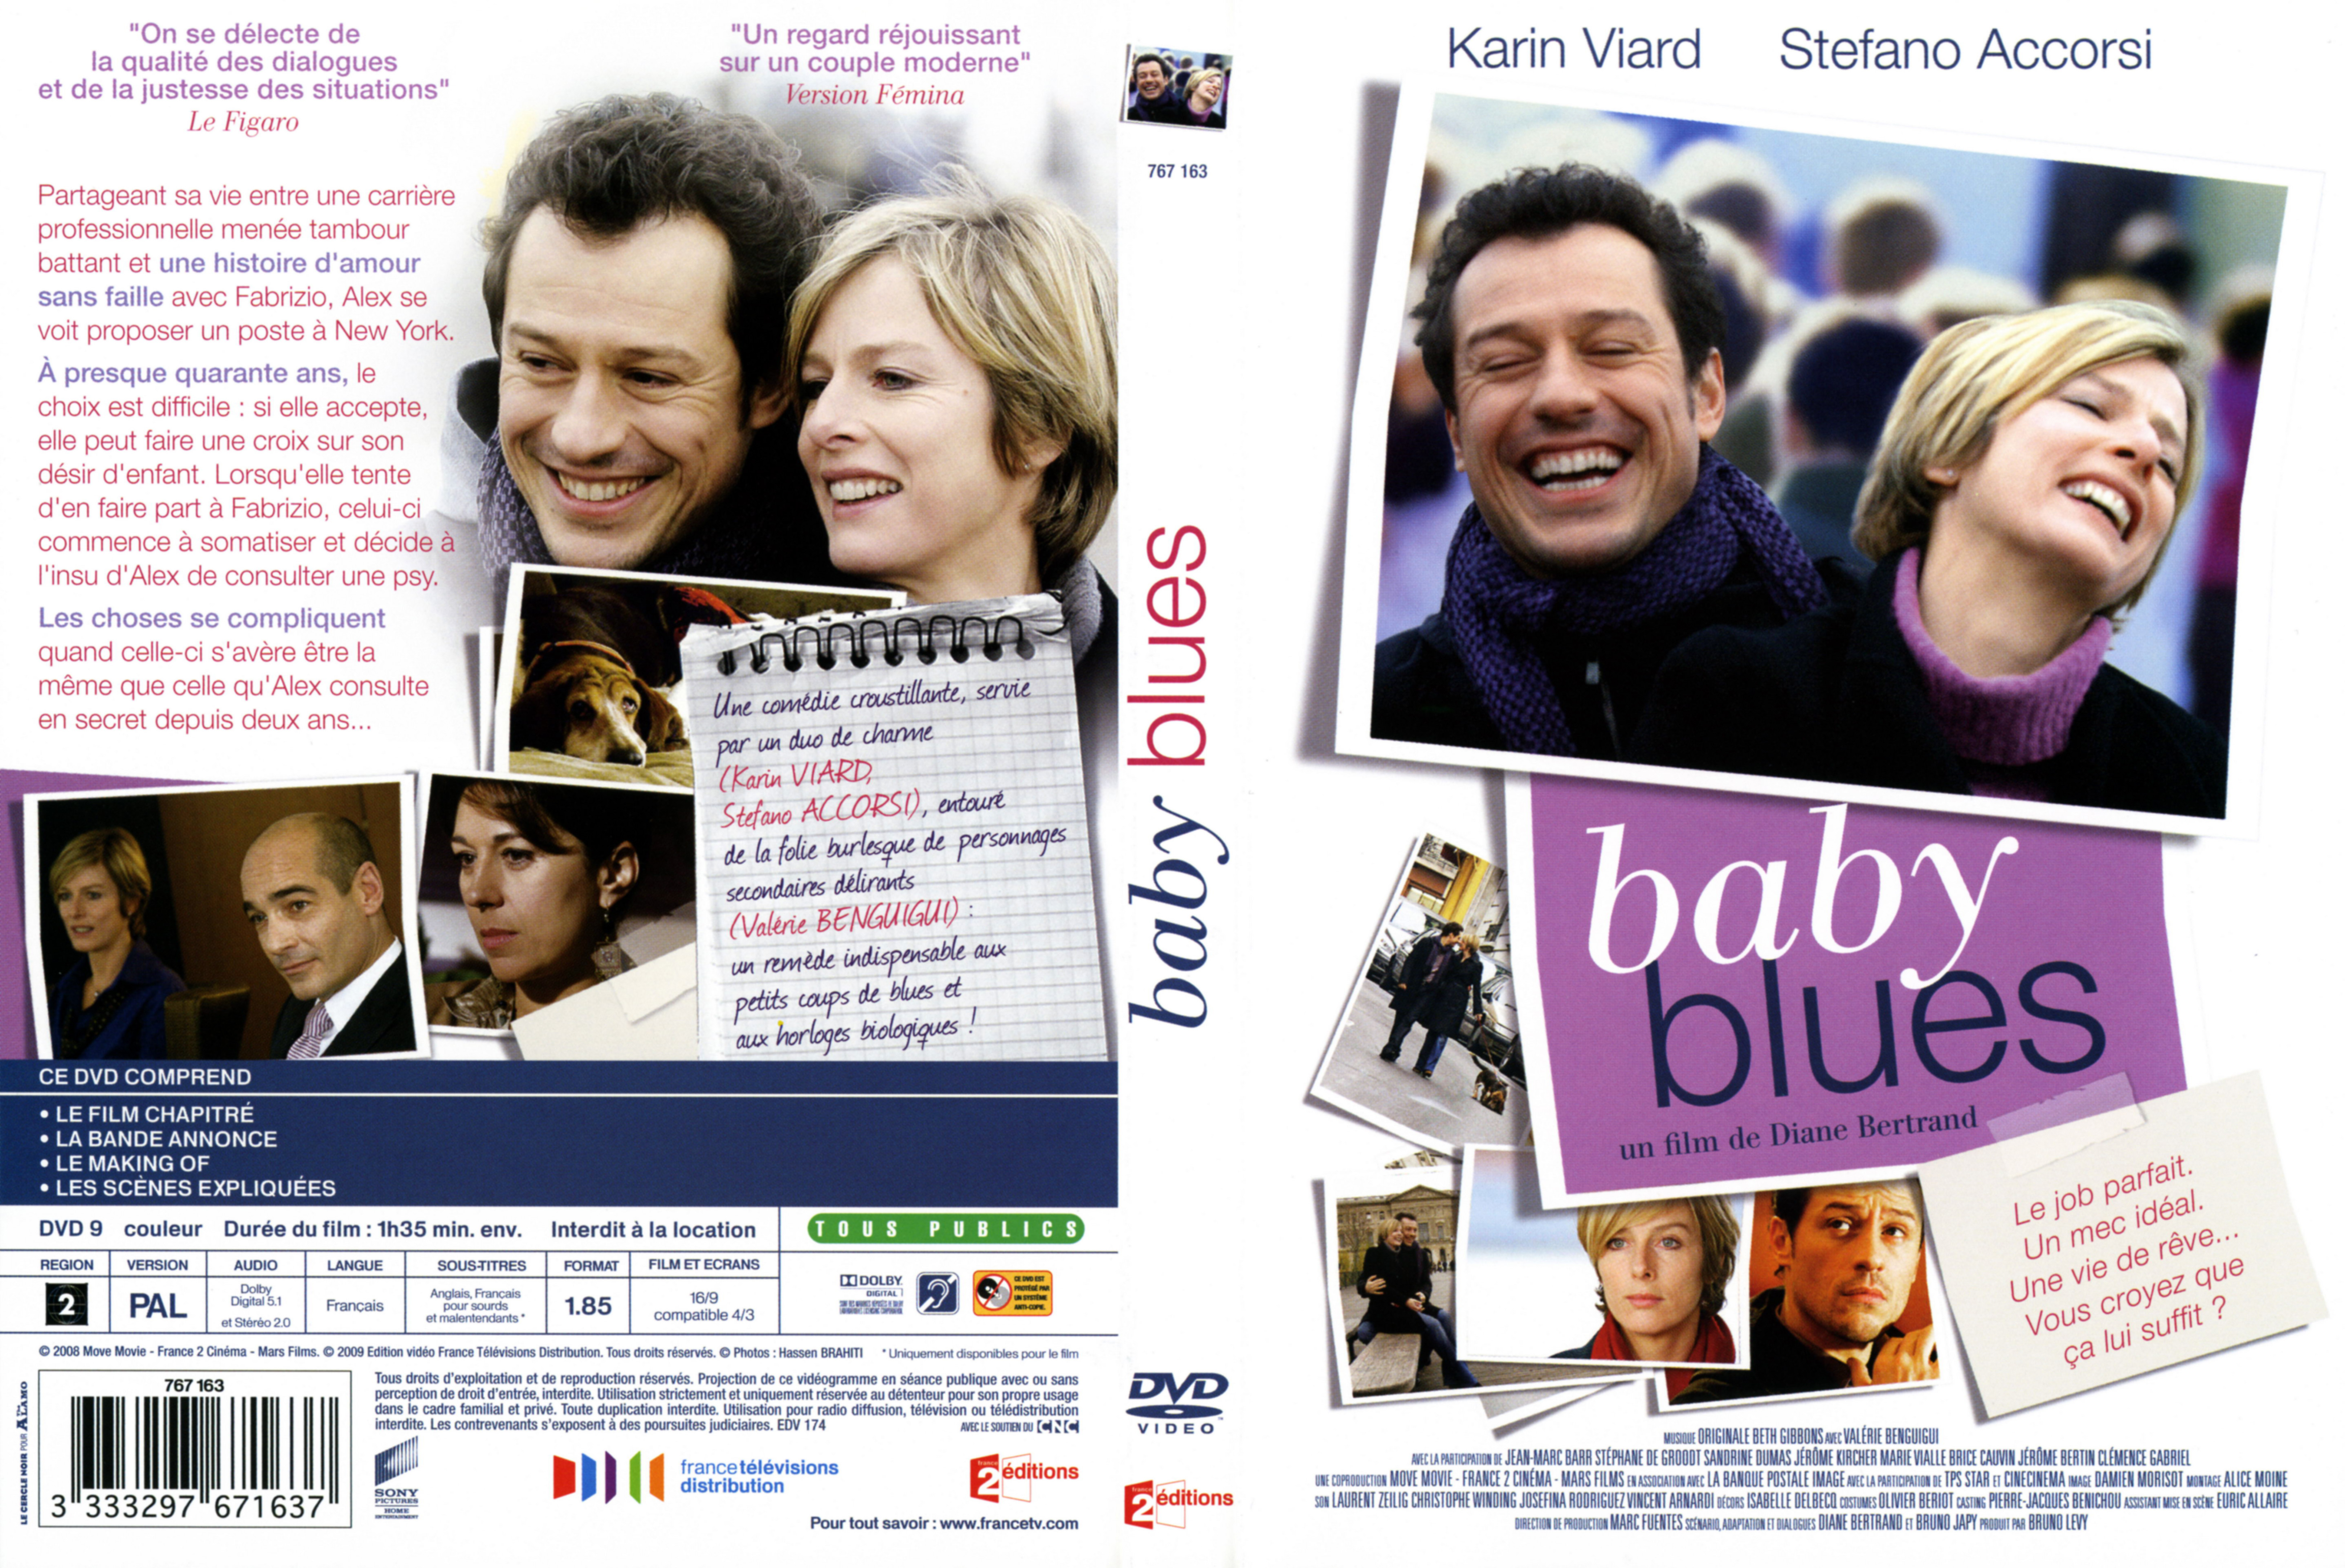 Jaquette DVD Baby blues